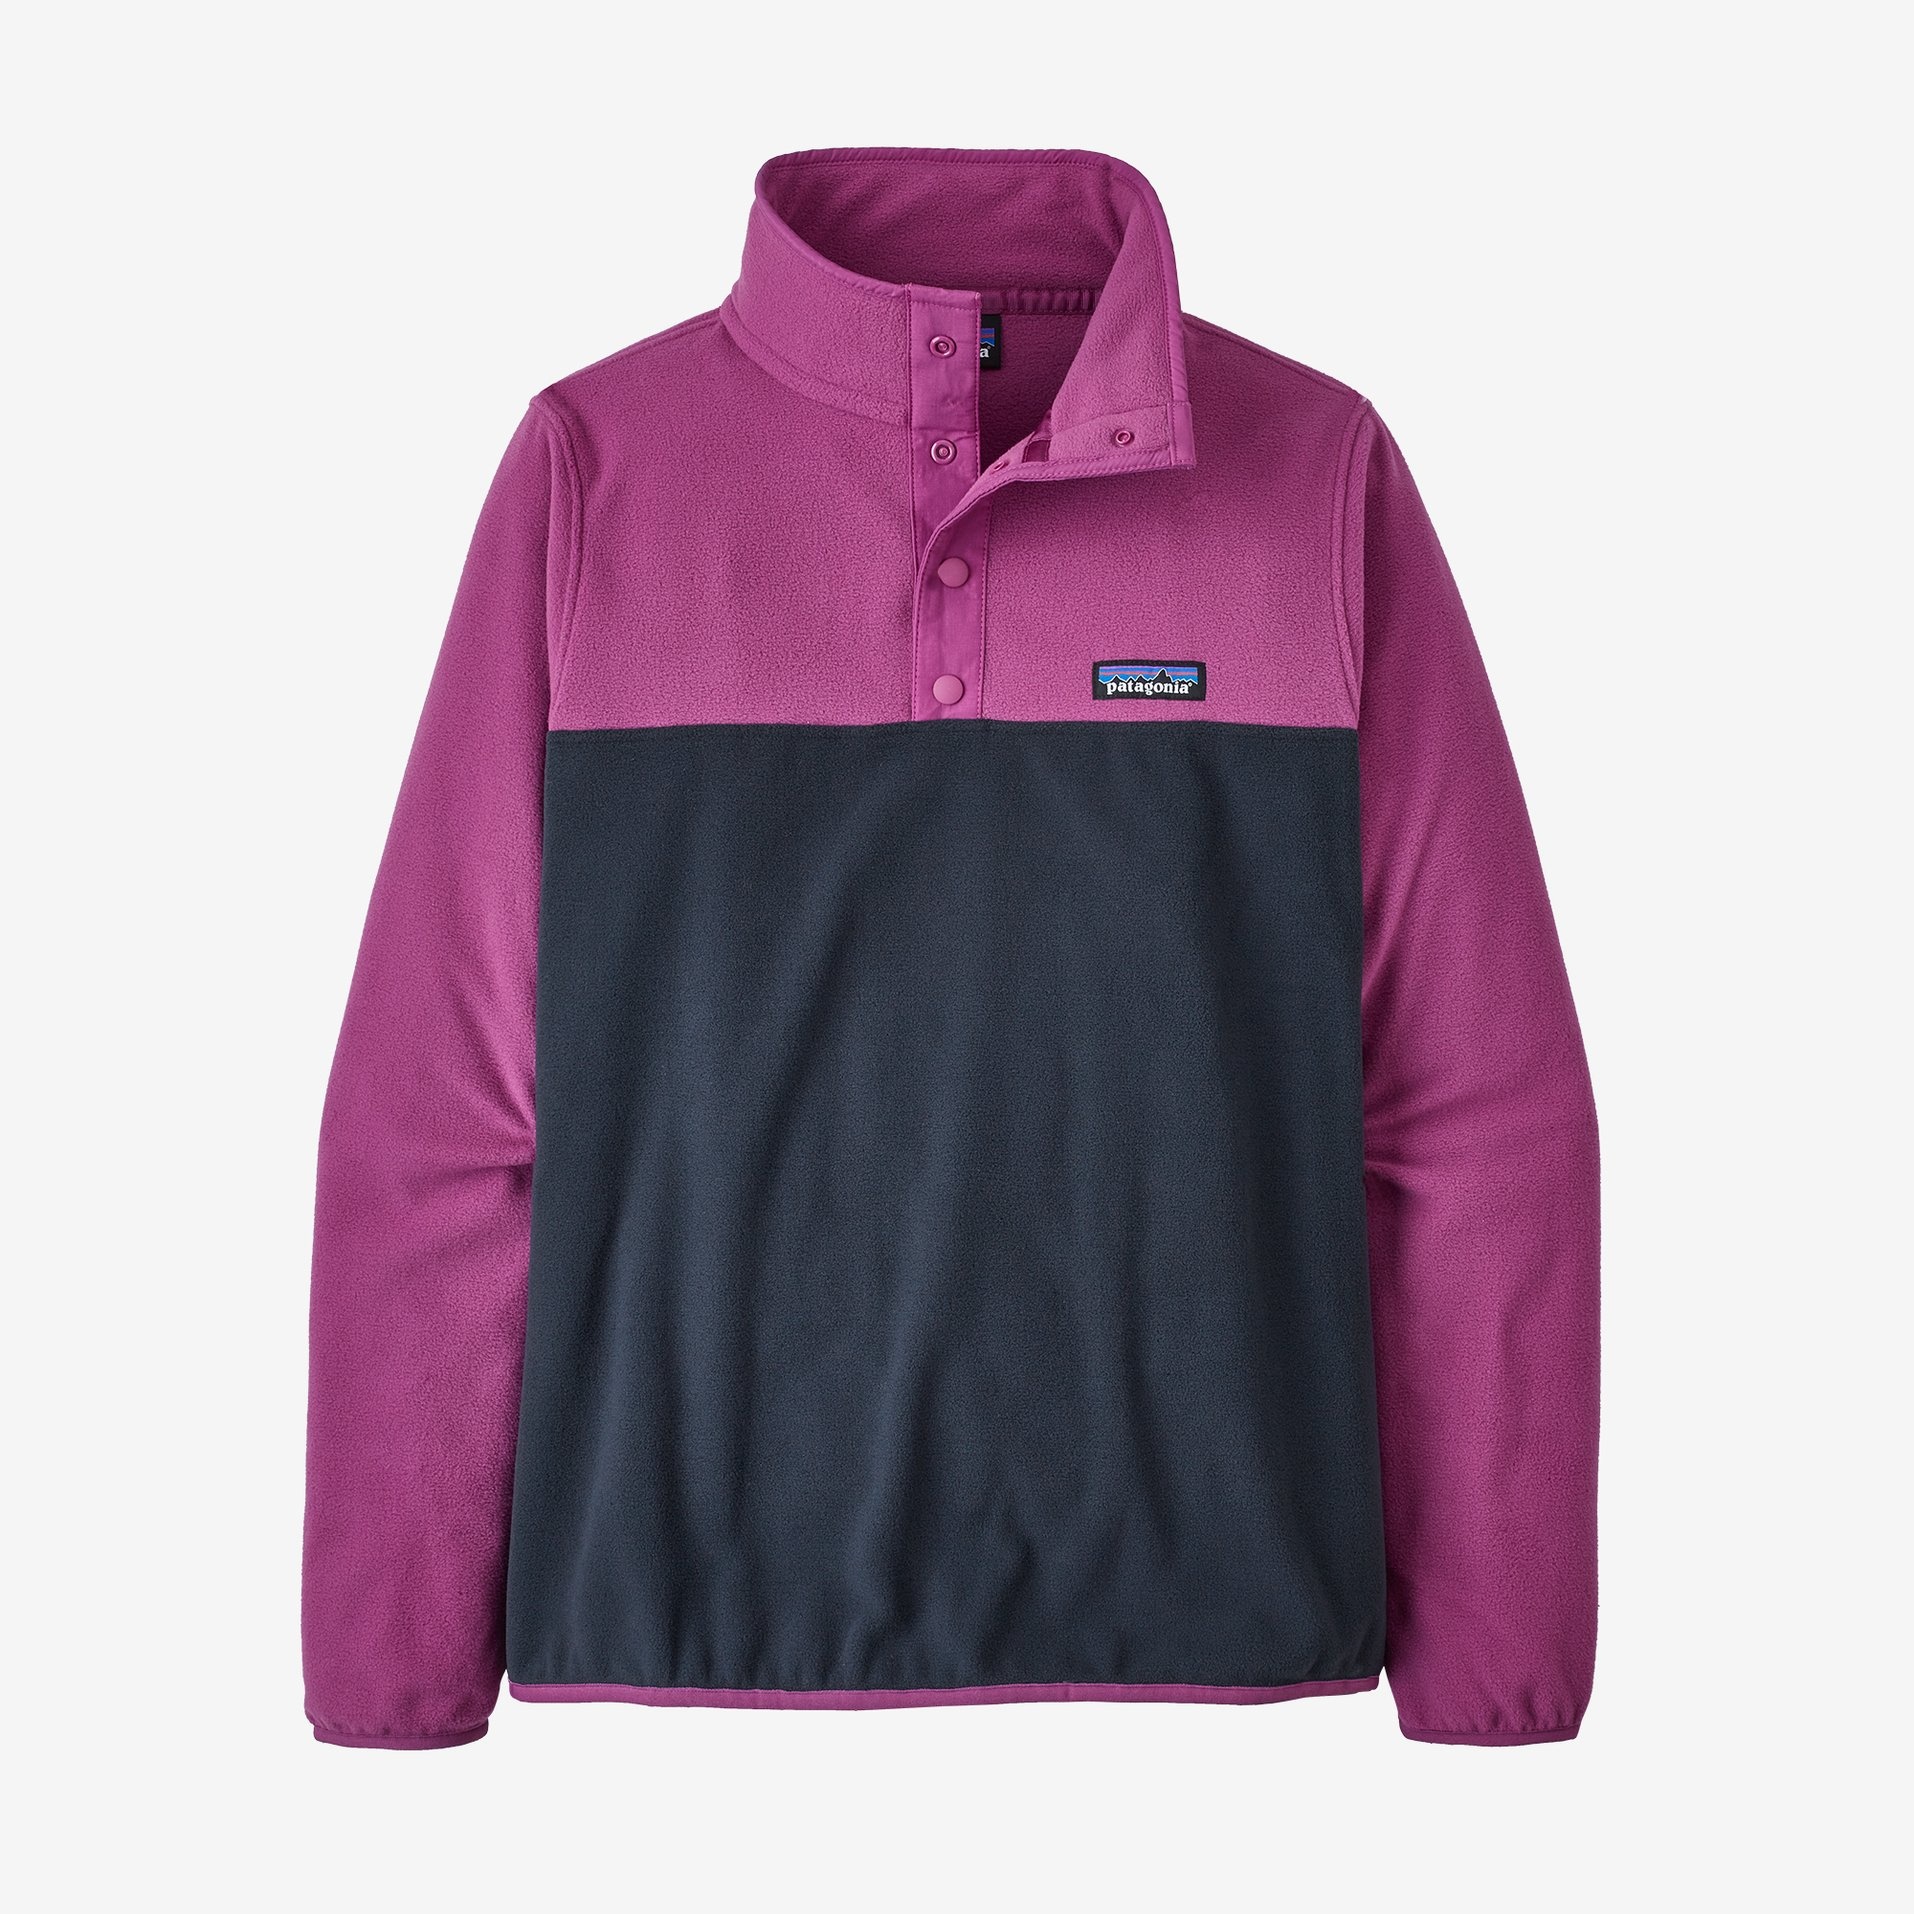 Patagonia Women's Micro D Snap-T Fleece Pull-Over